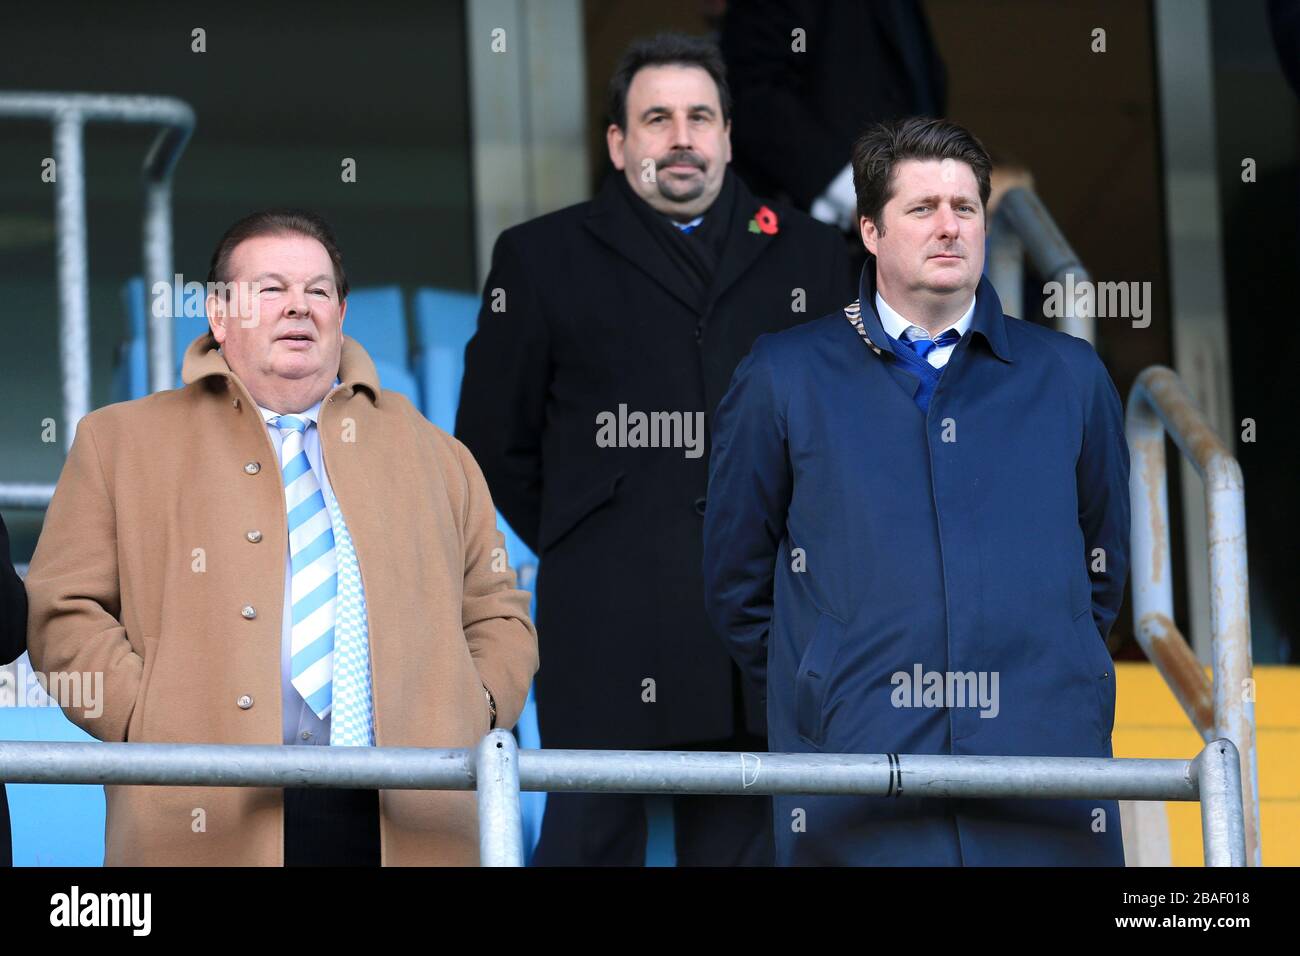 Coventry City vice chairman John Clarke OBE (left) and chief executive Tim Fisher (right) in the stands Stock Photo